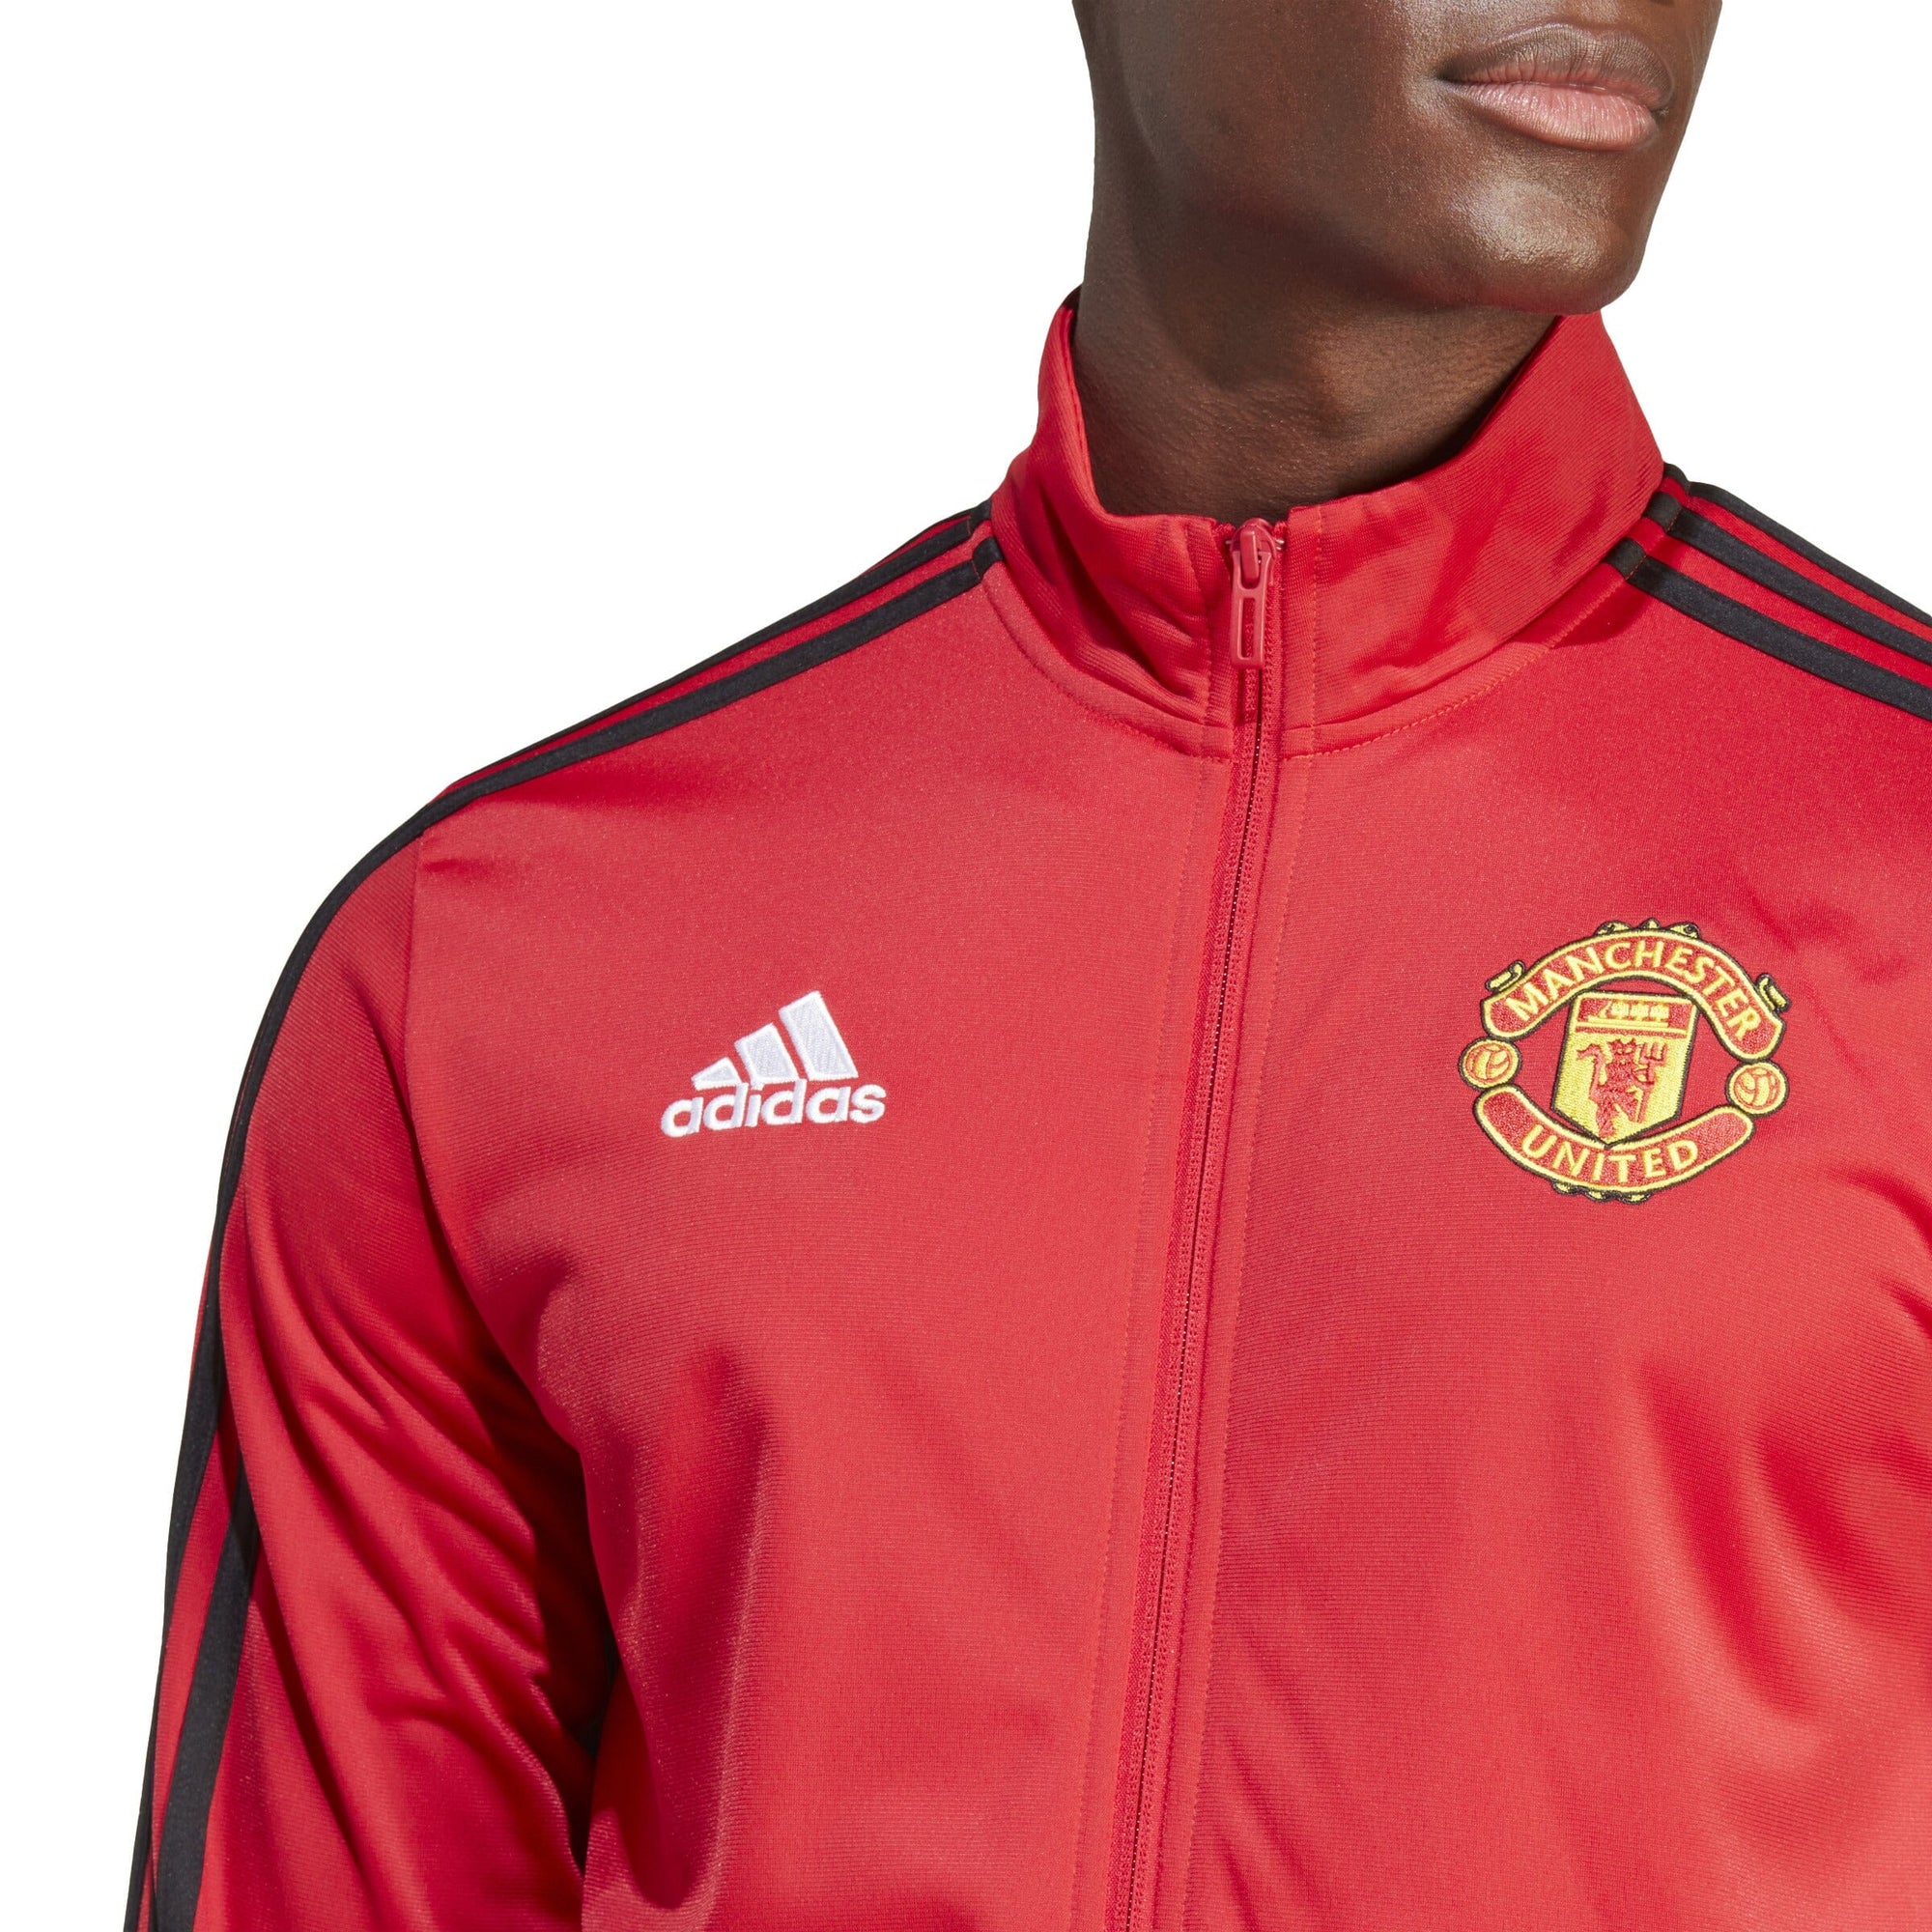 adidas Men's Manchester United FC 23/24 DNA Track Top | IA8534 Jacket Adidas 